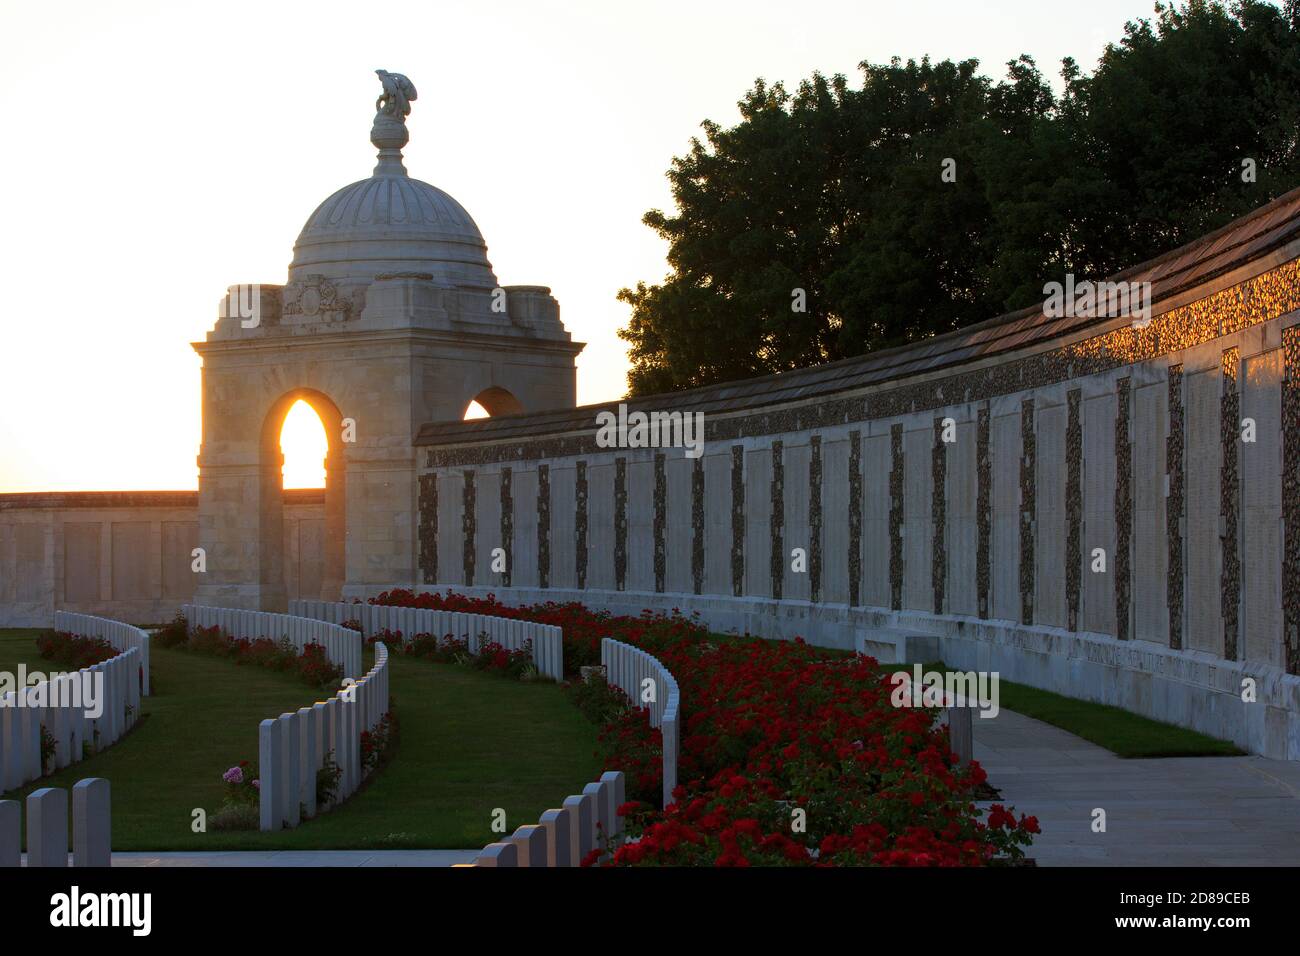 Tyne Cot Cemetery (1914-1918), the largest cemetery for Commonwealth forces in the world, for any war, in Zonnebeke, Belgium at sunset Stock Photo